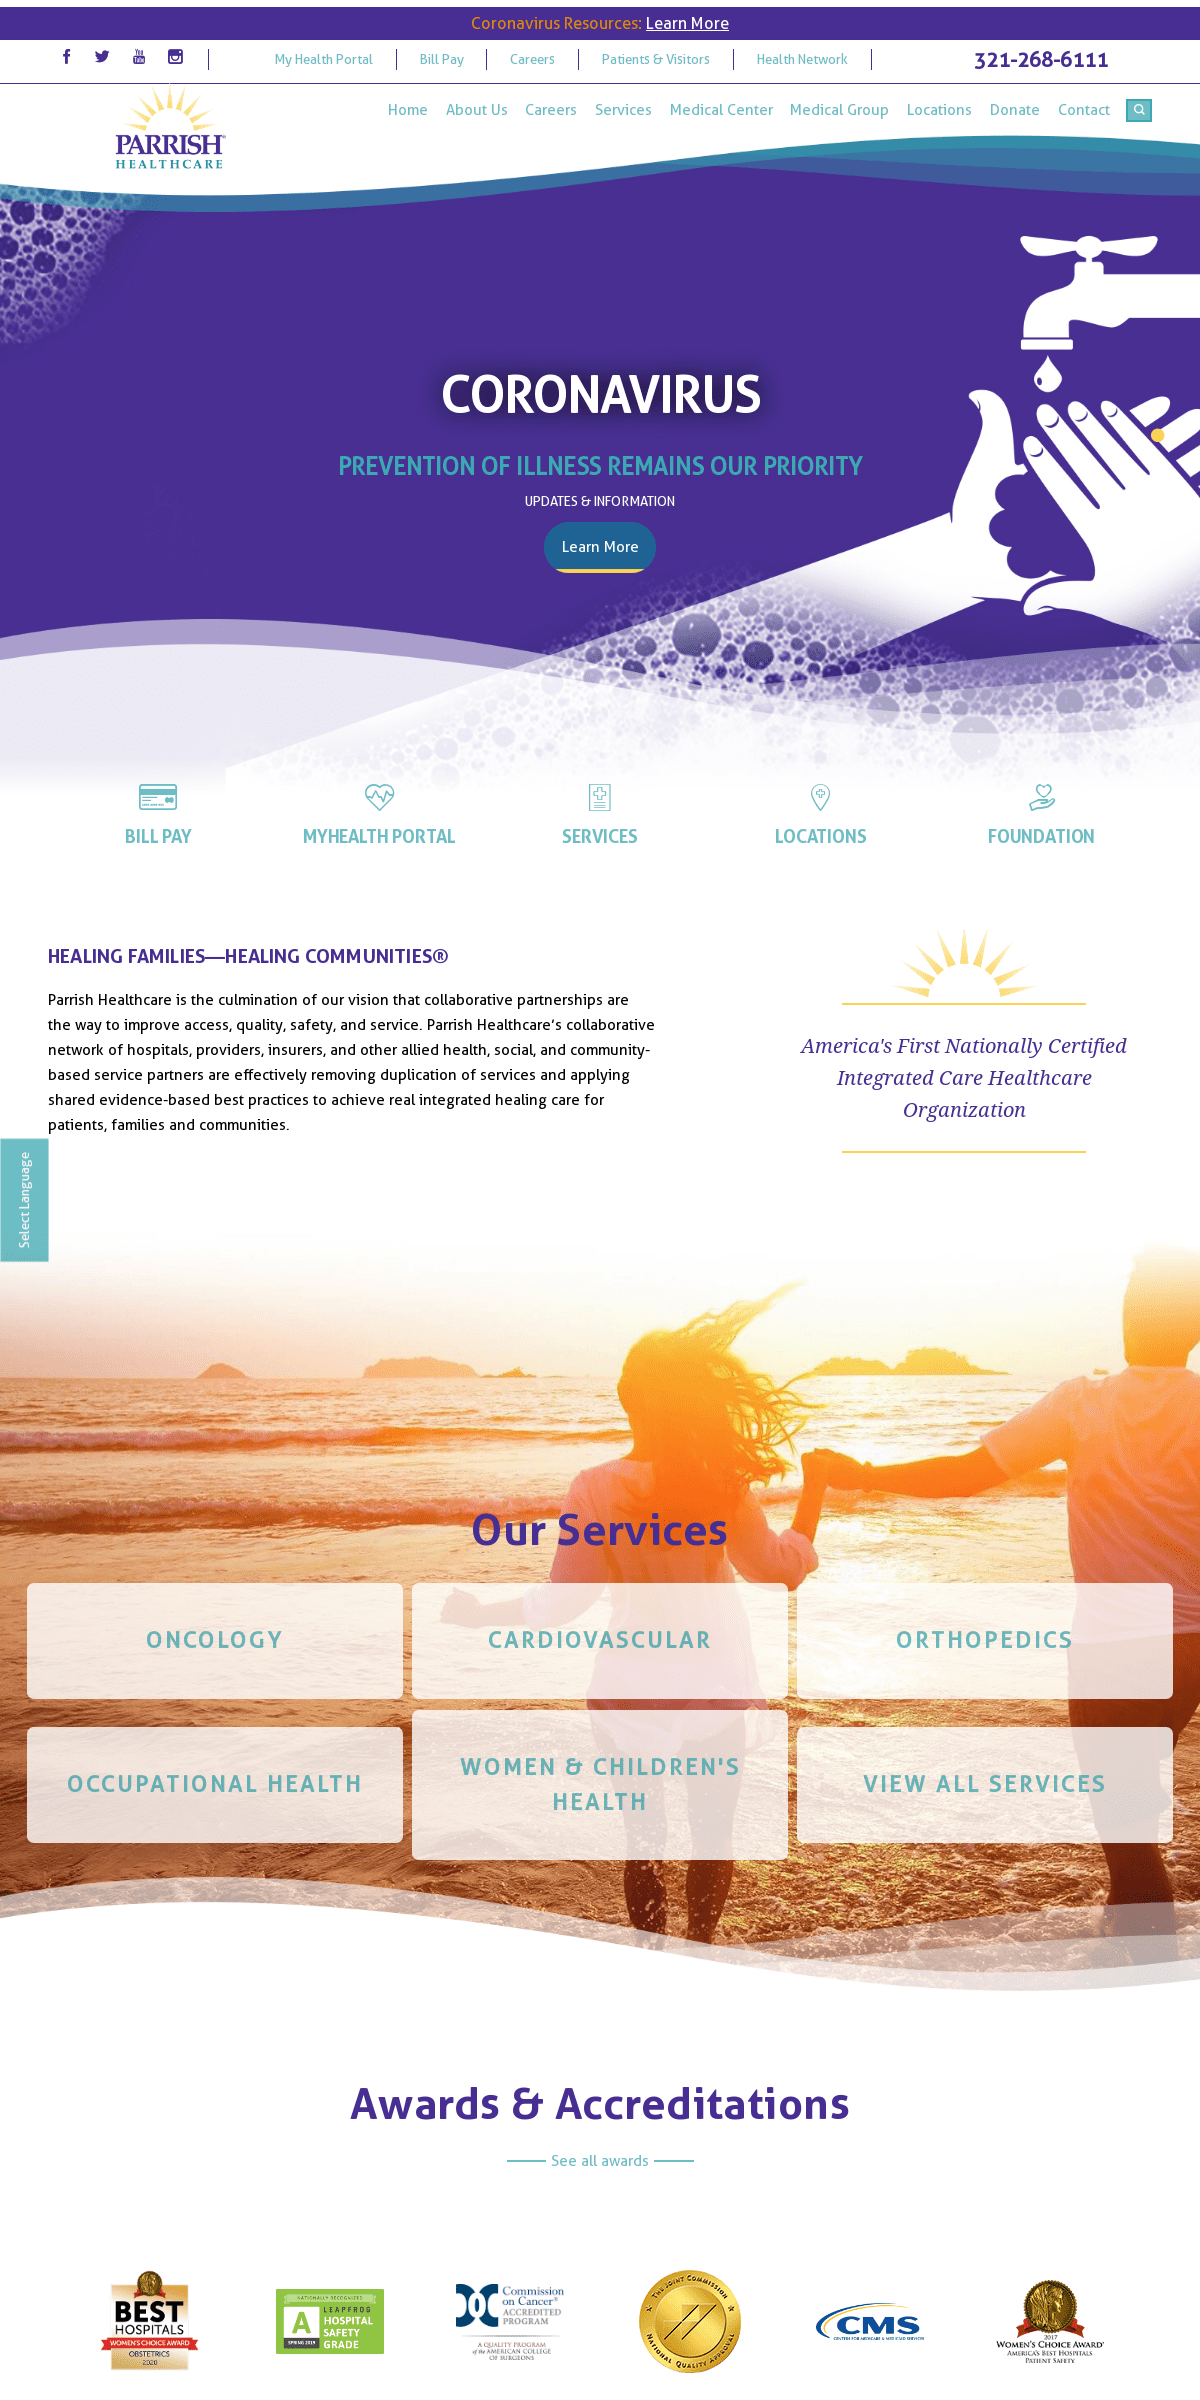 A complete backup of parrishhealthcare.com